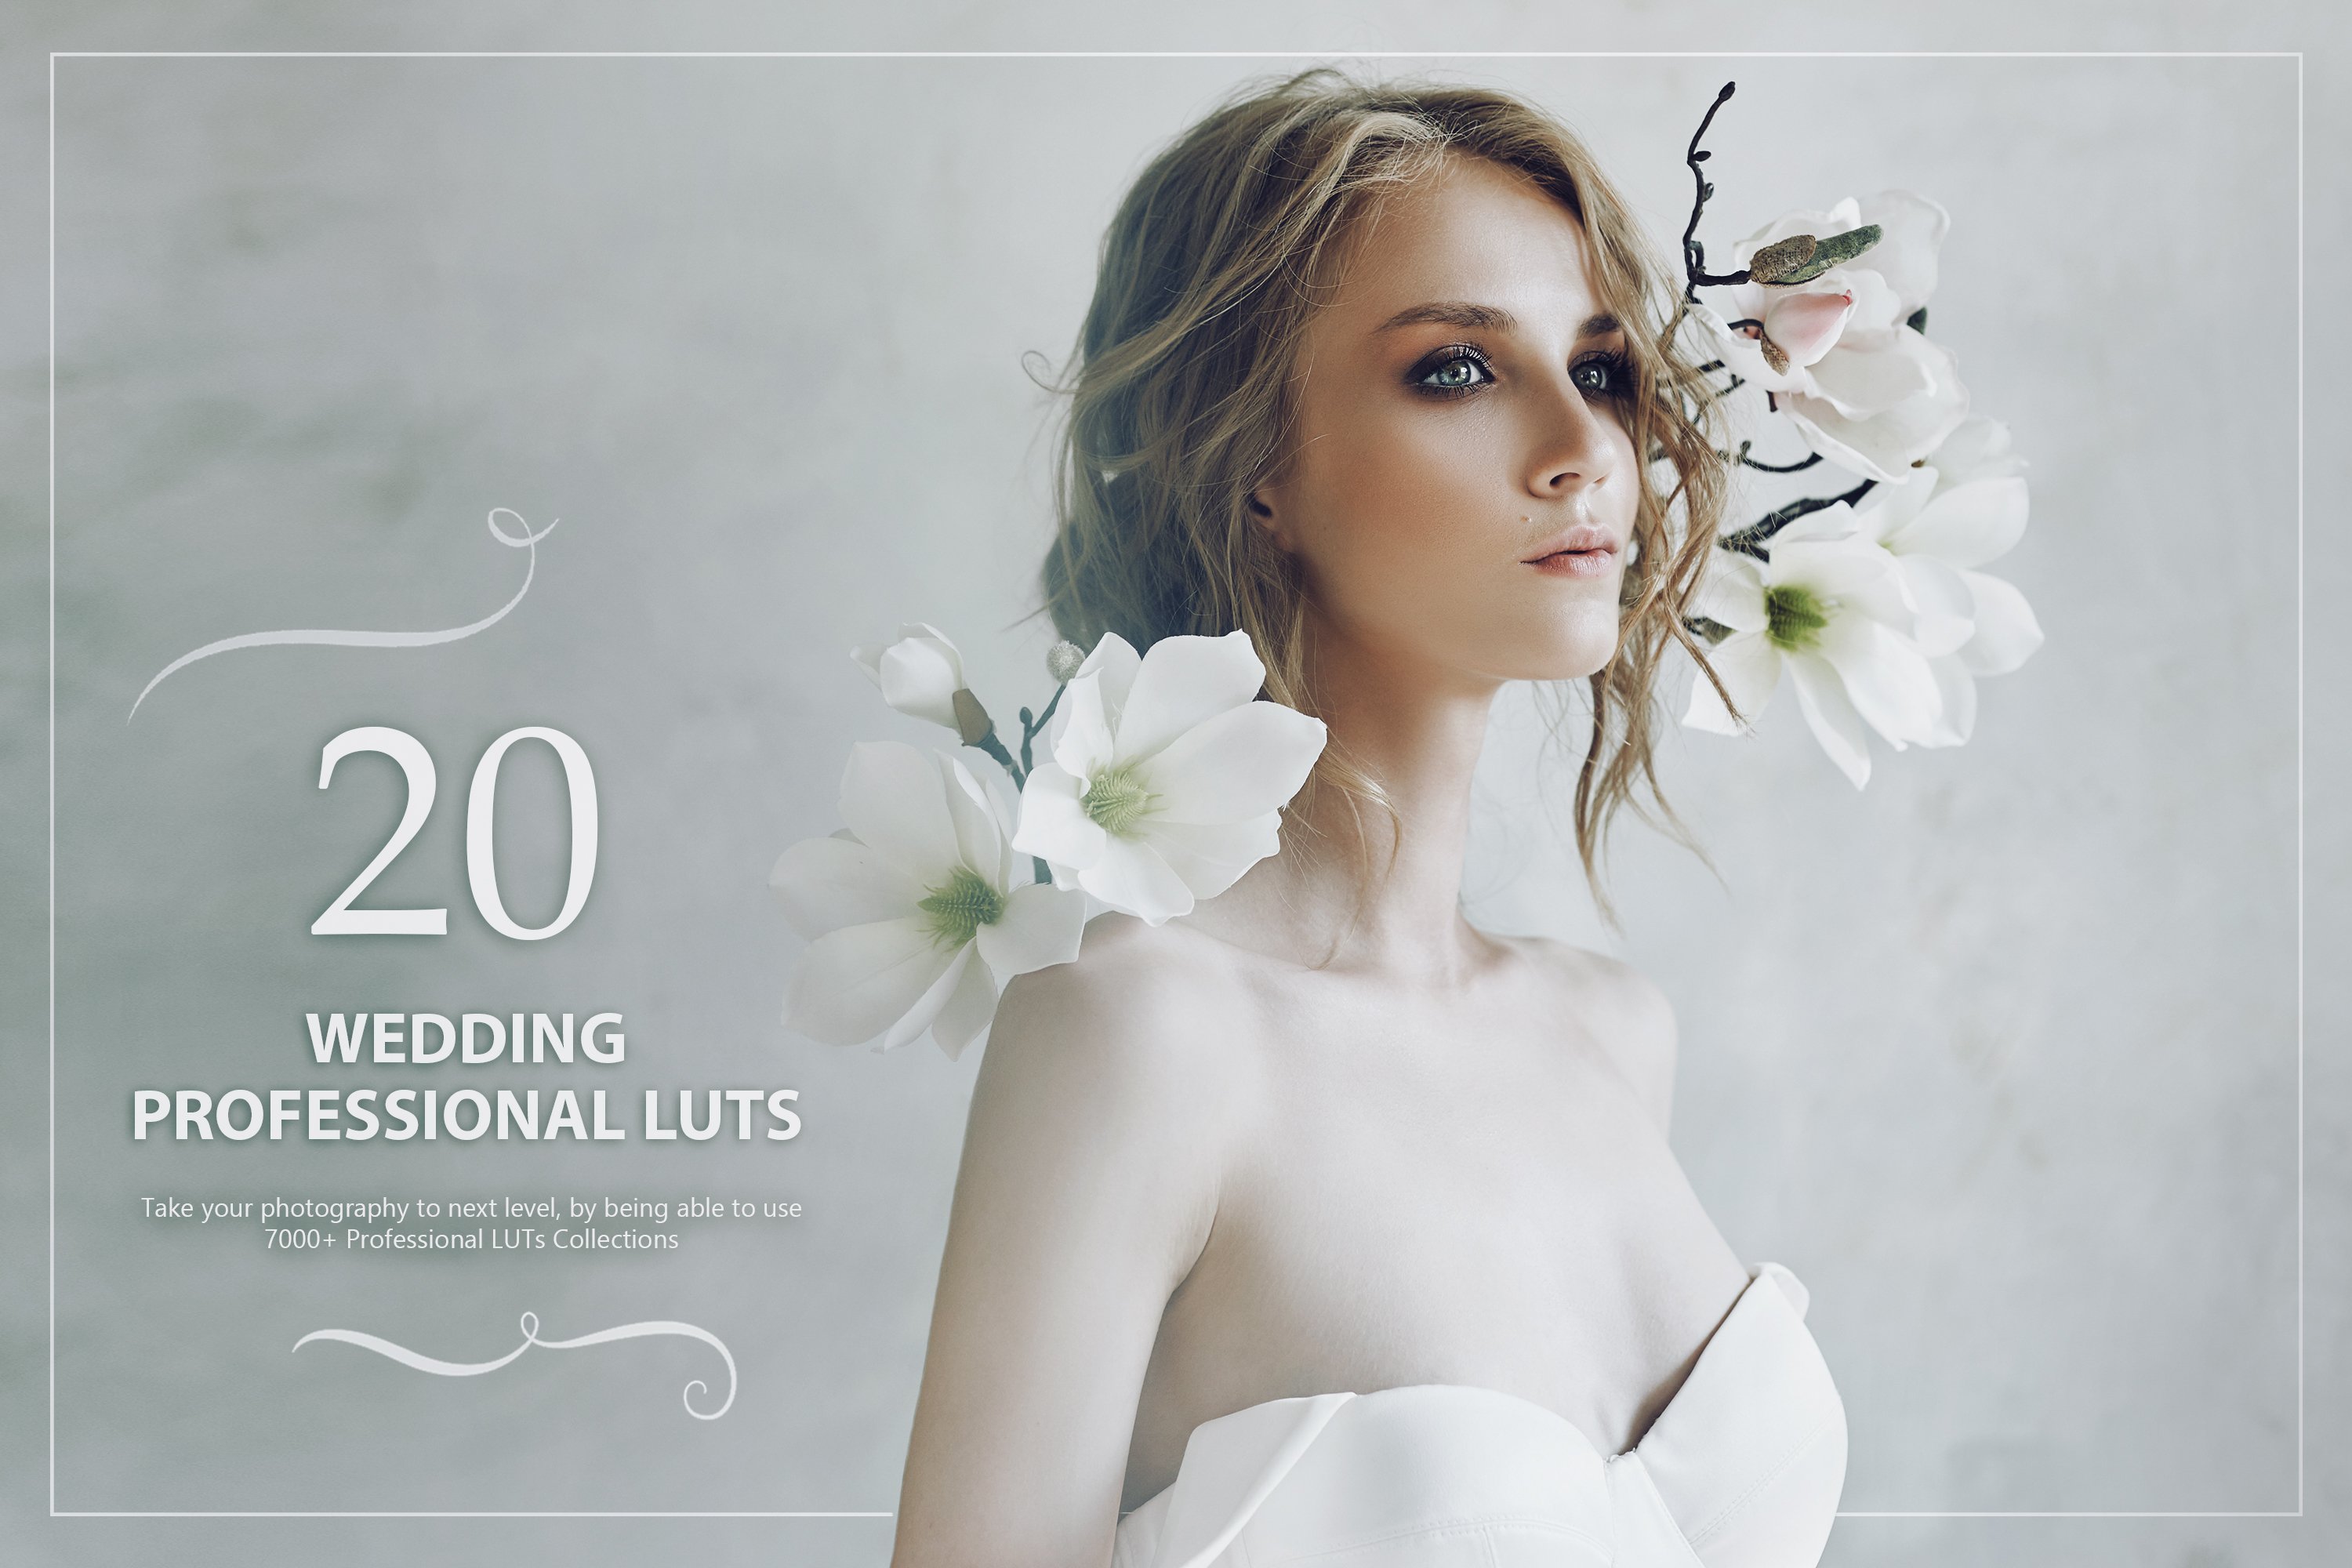 20 Wedding LUTs Packcover image.